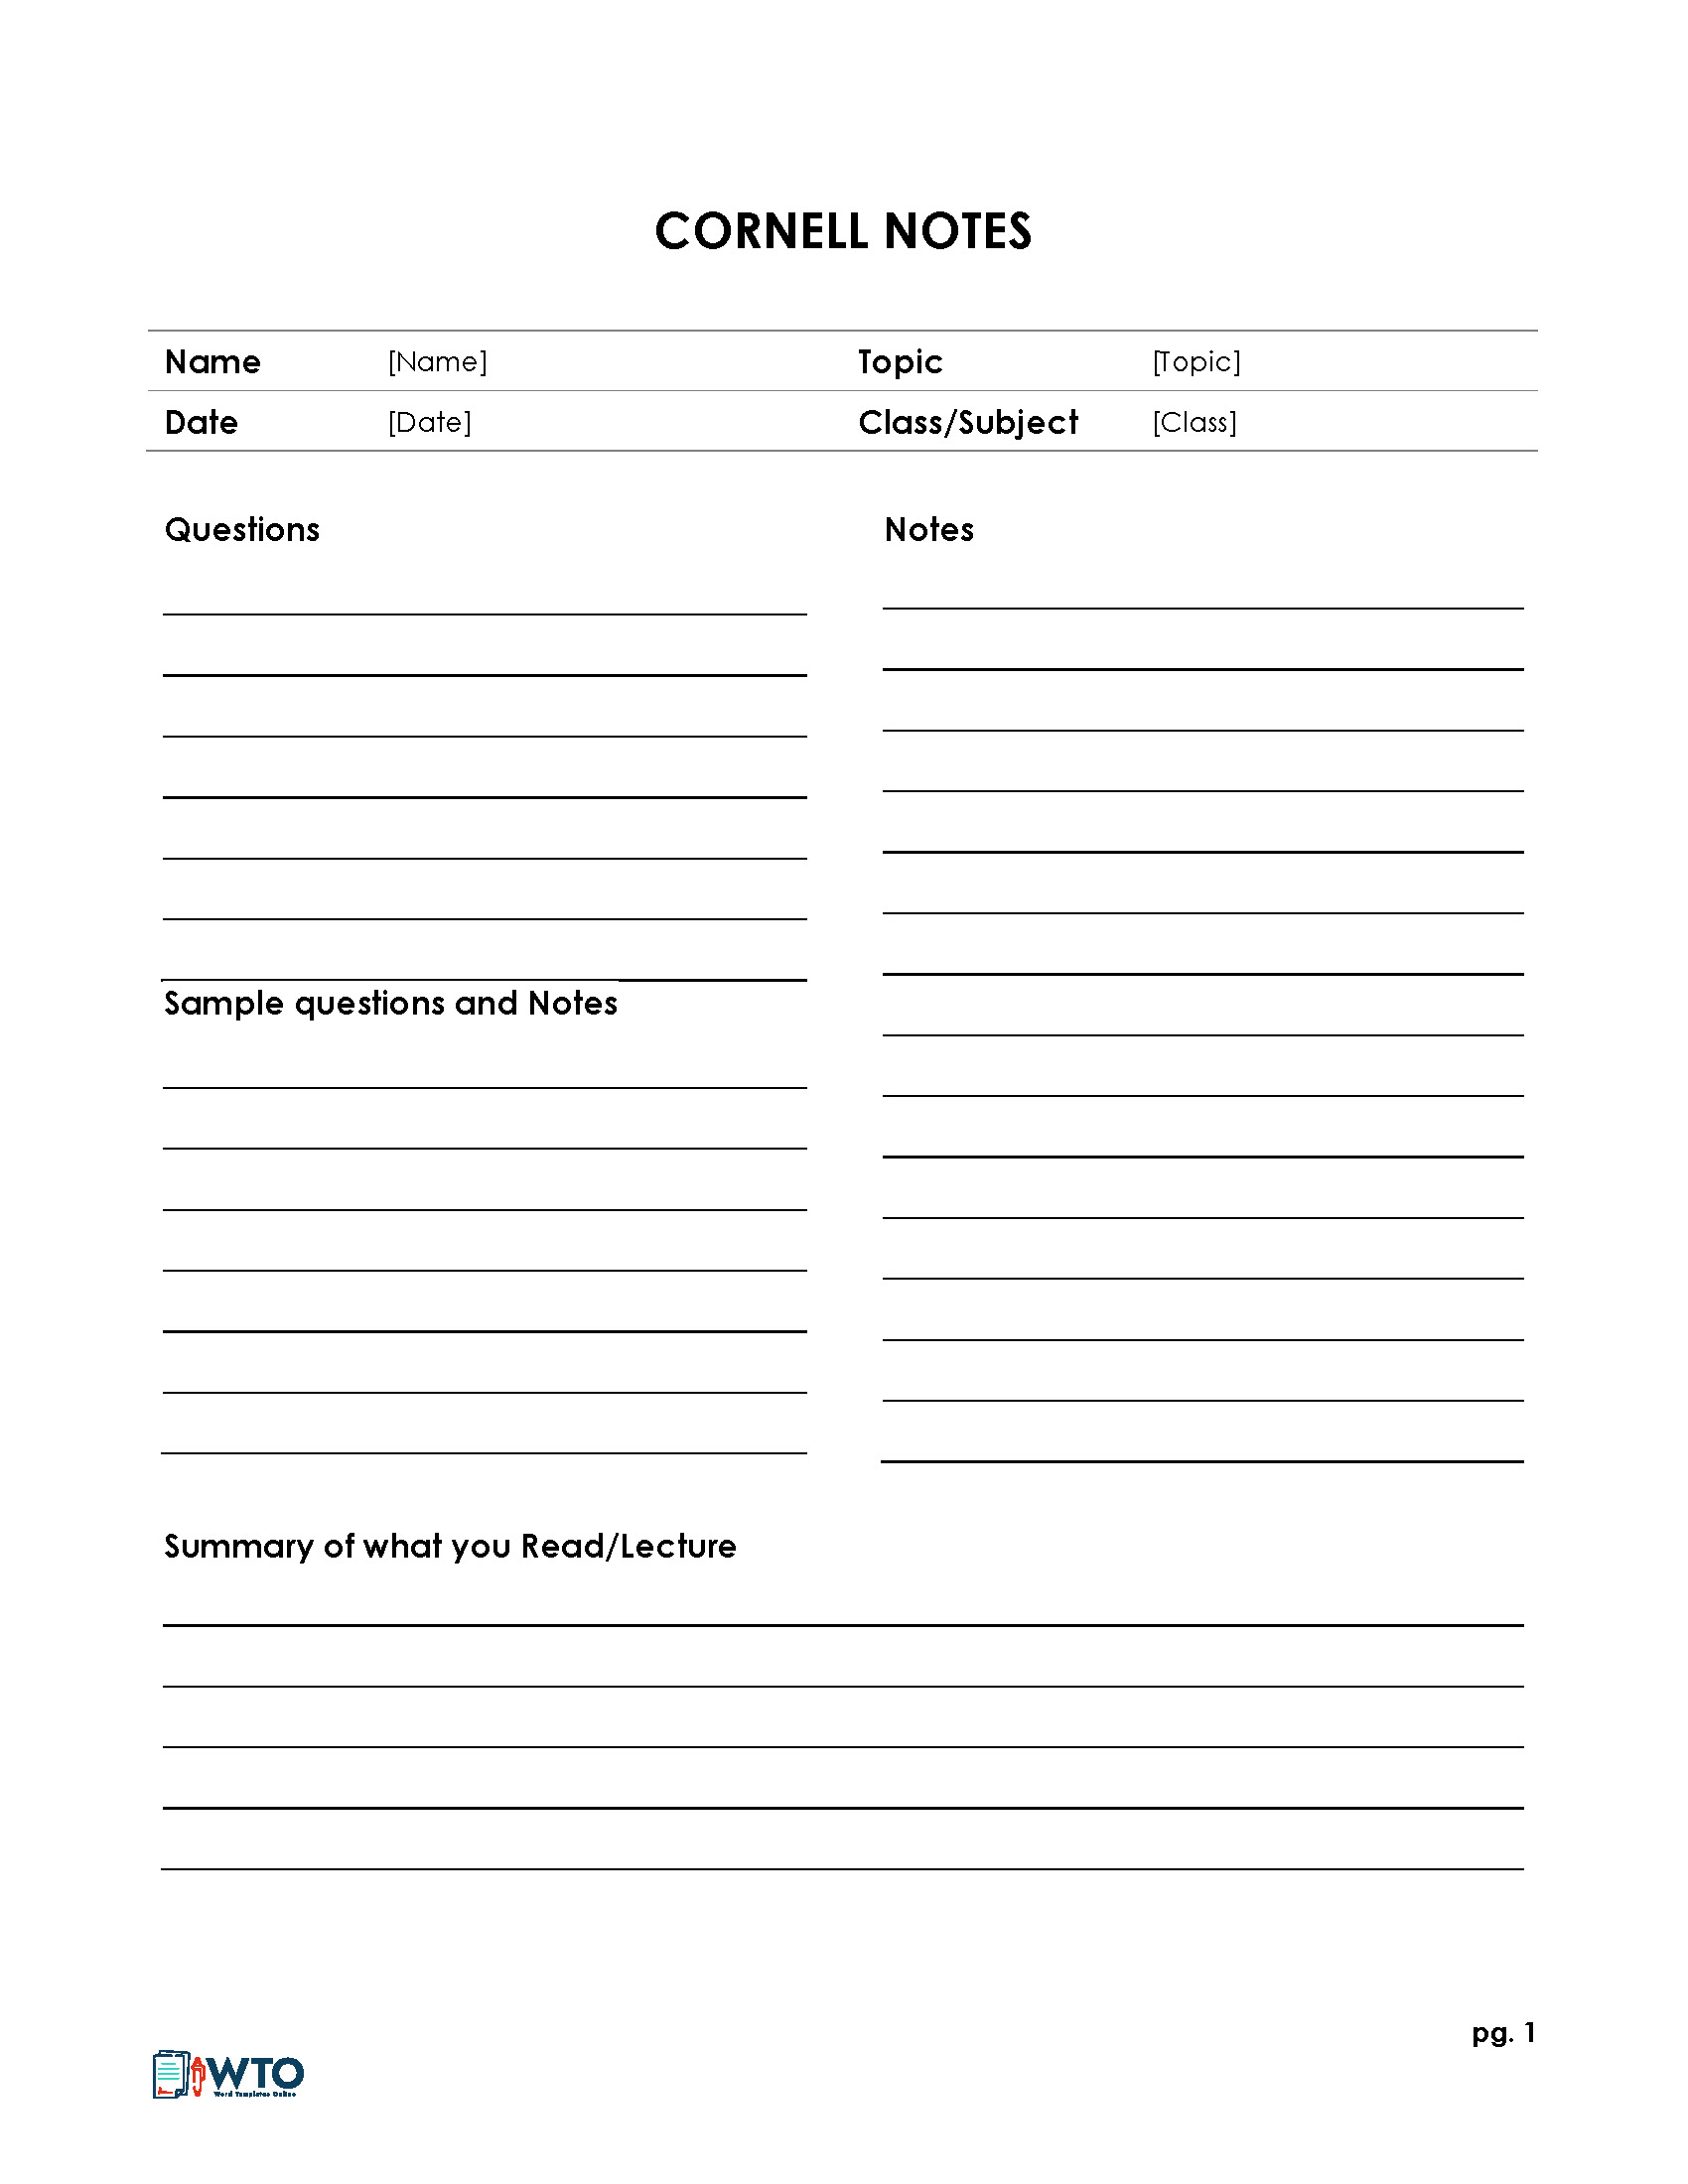 23 Free Cornell Note Templates (Cornell Note Taking Explained) Throughout Note Taking Template Word